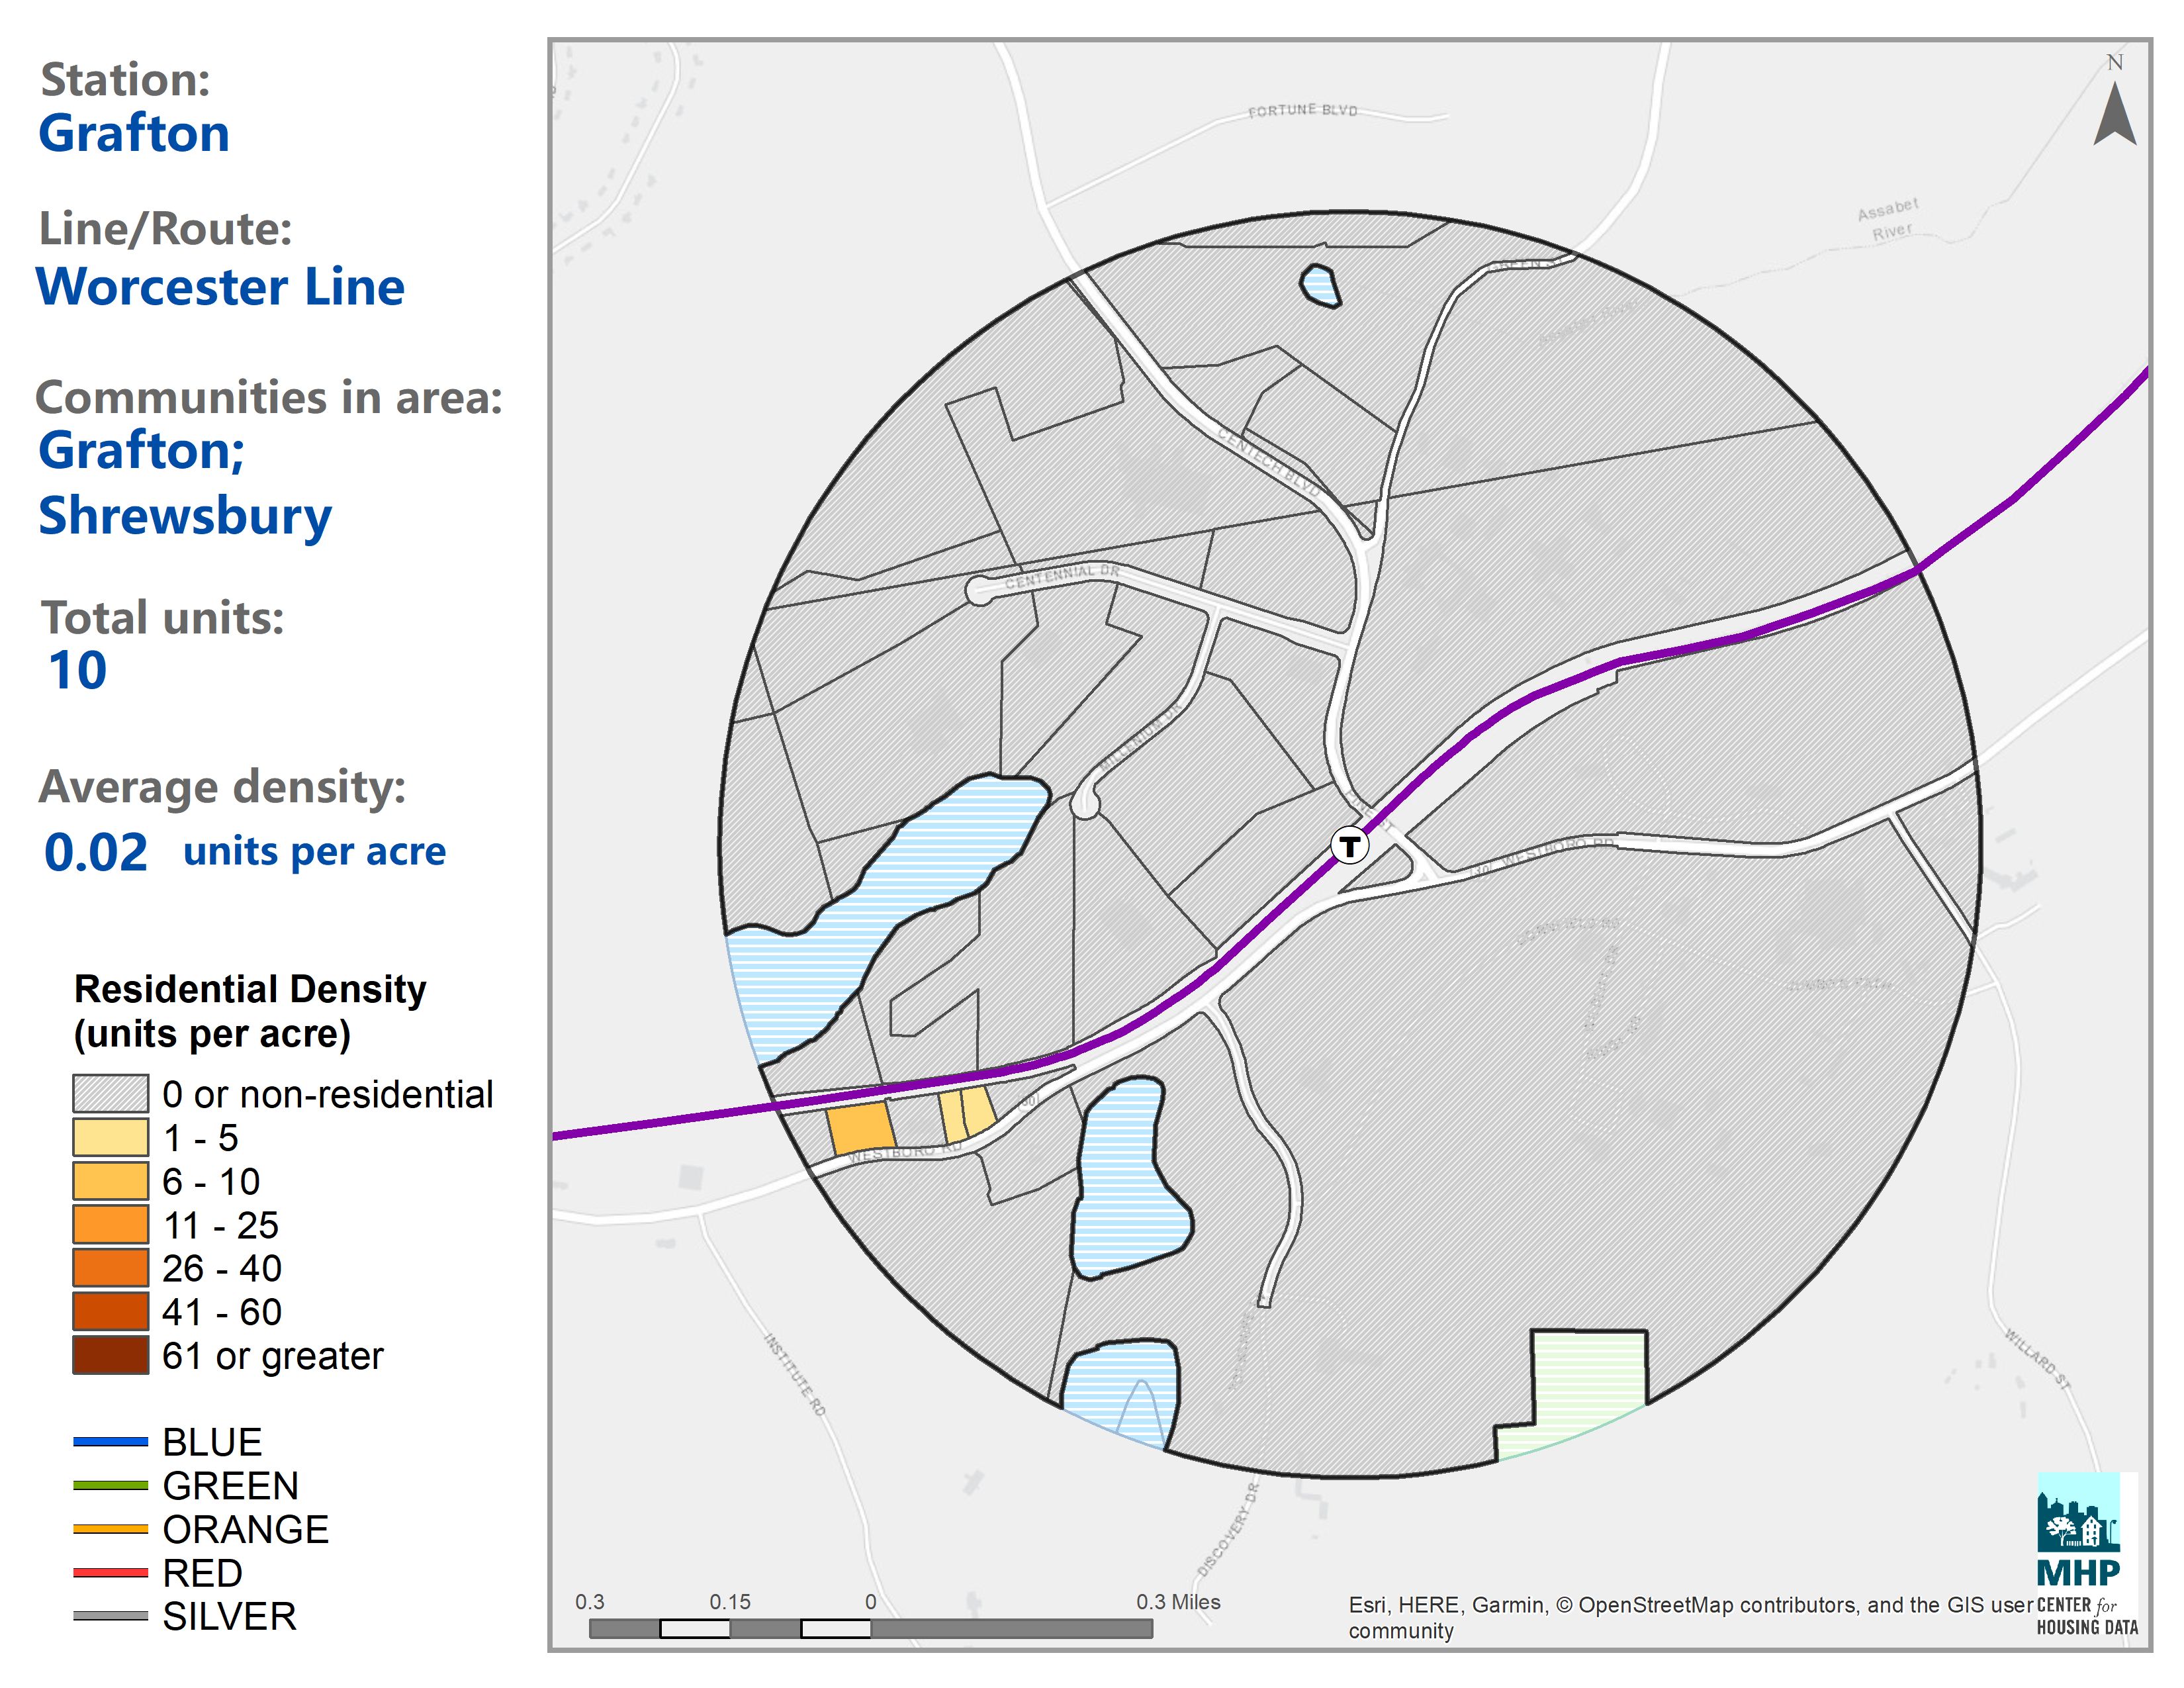 TODEX allows you to download maps showing density around each transit station.